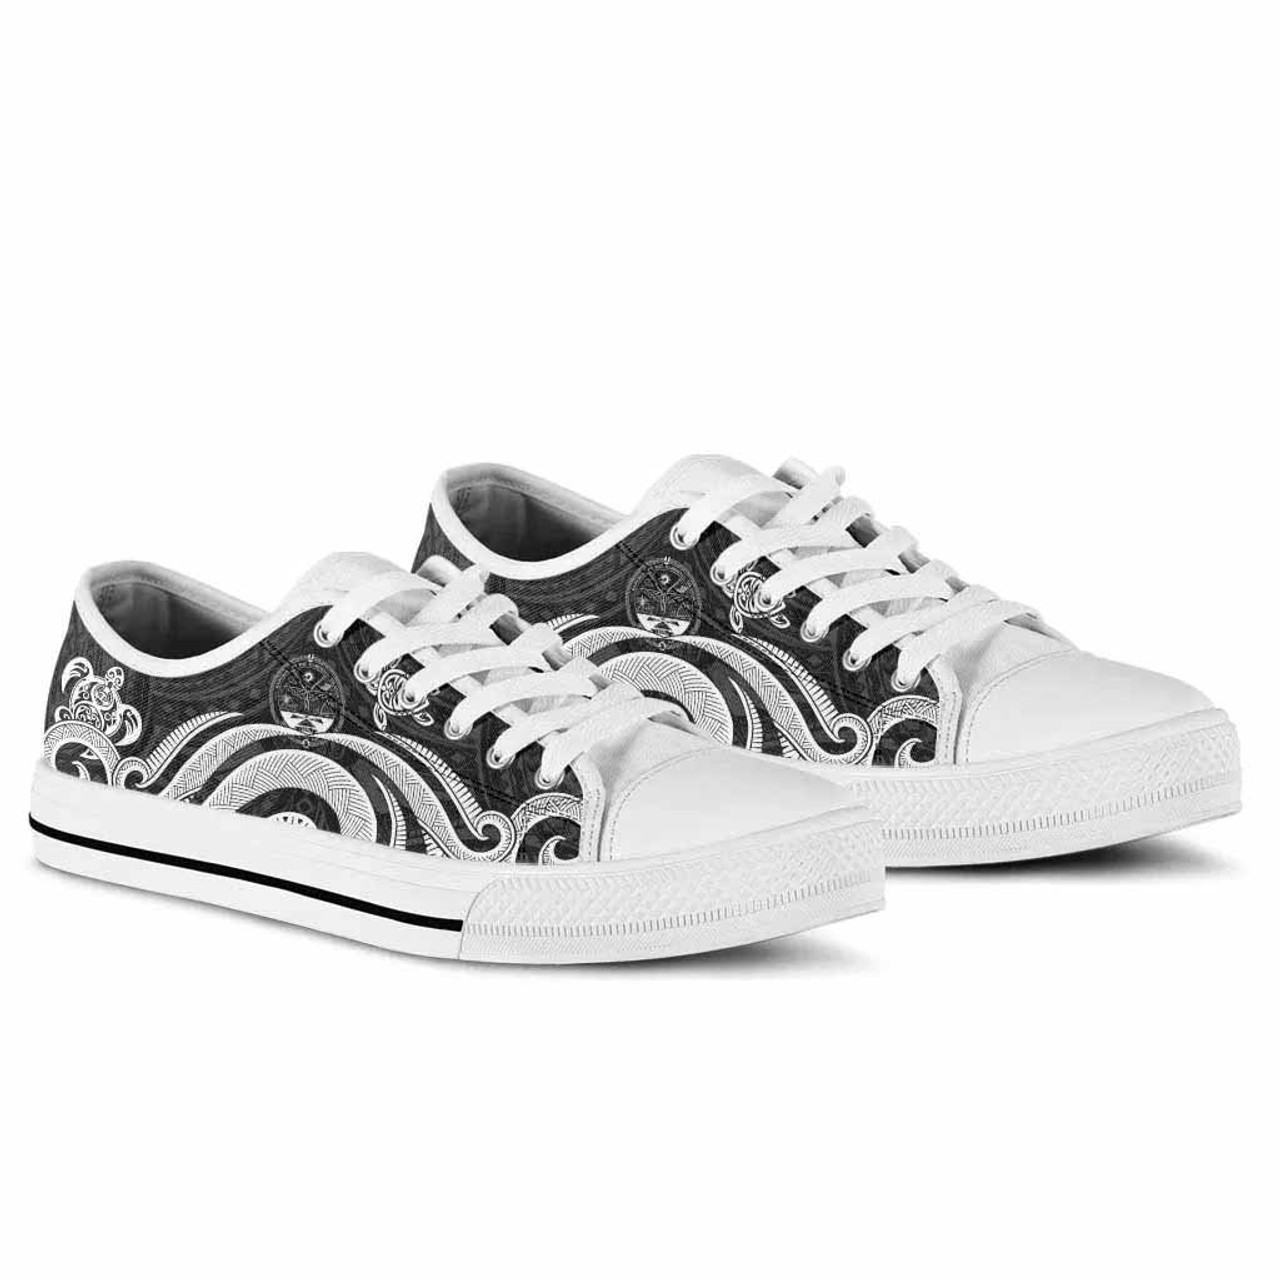 Marshall Islands Low Top Canvas Shoes - White Tentacle Turtle Crest 6